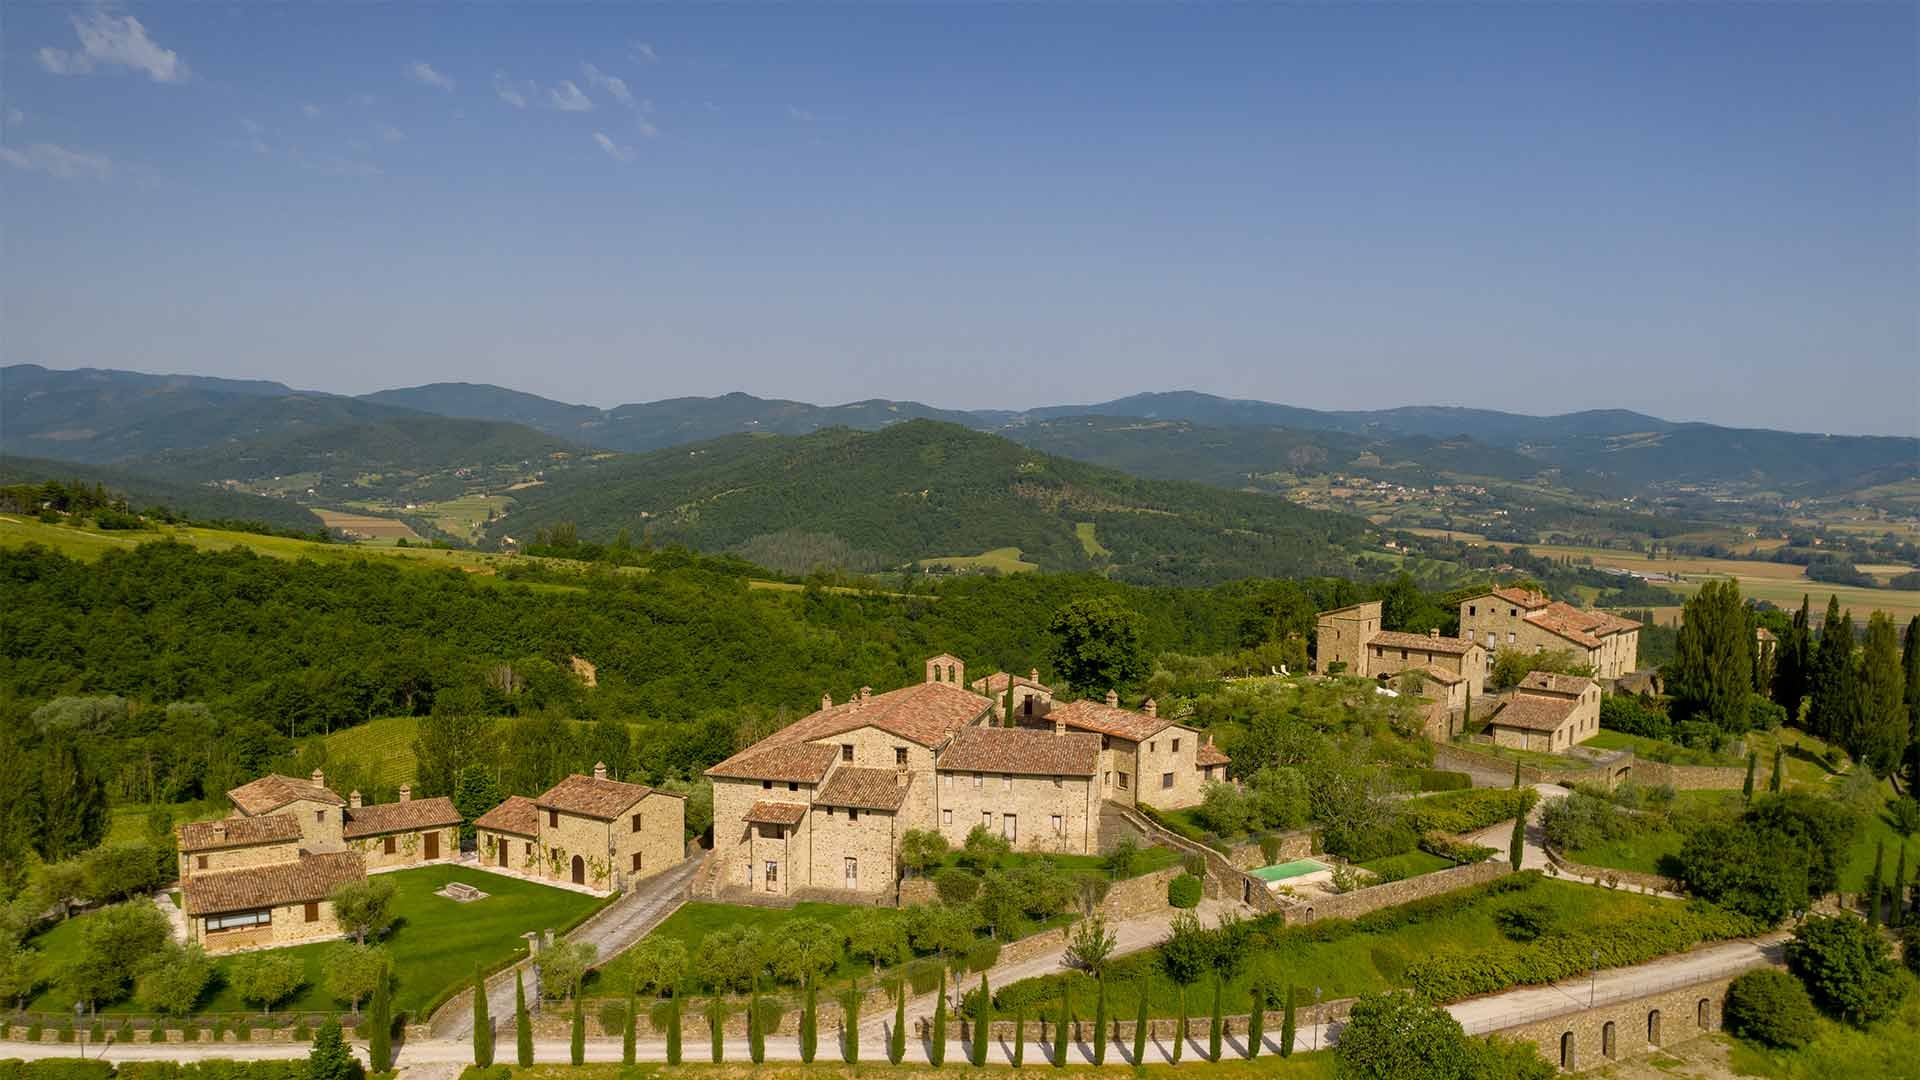 Francis York Ancient Hamlet For Sale Near the Border of Tuscany and Umbria 21.jpg